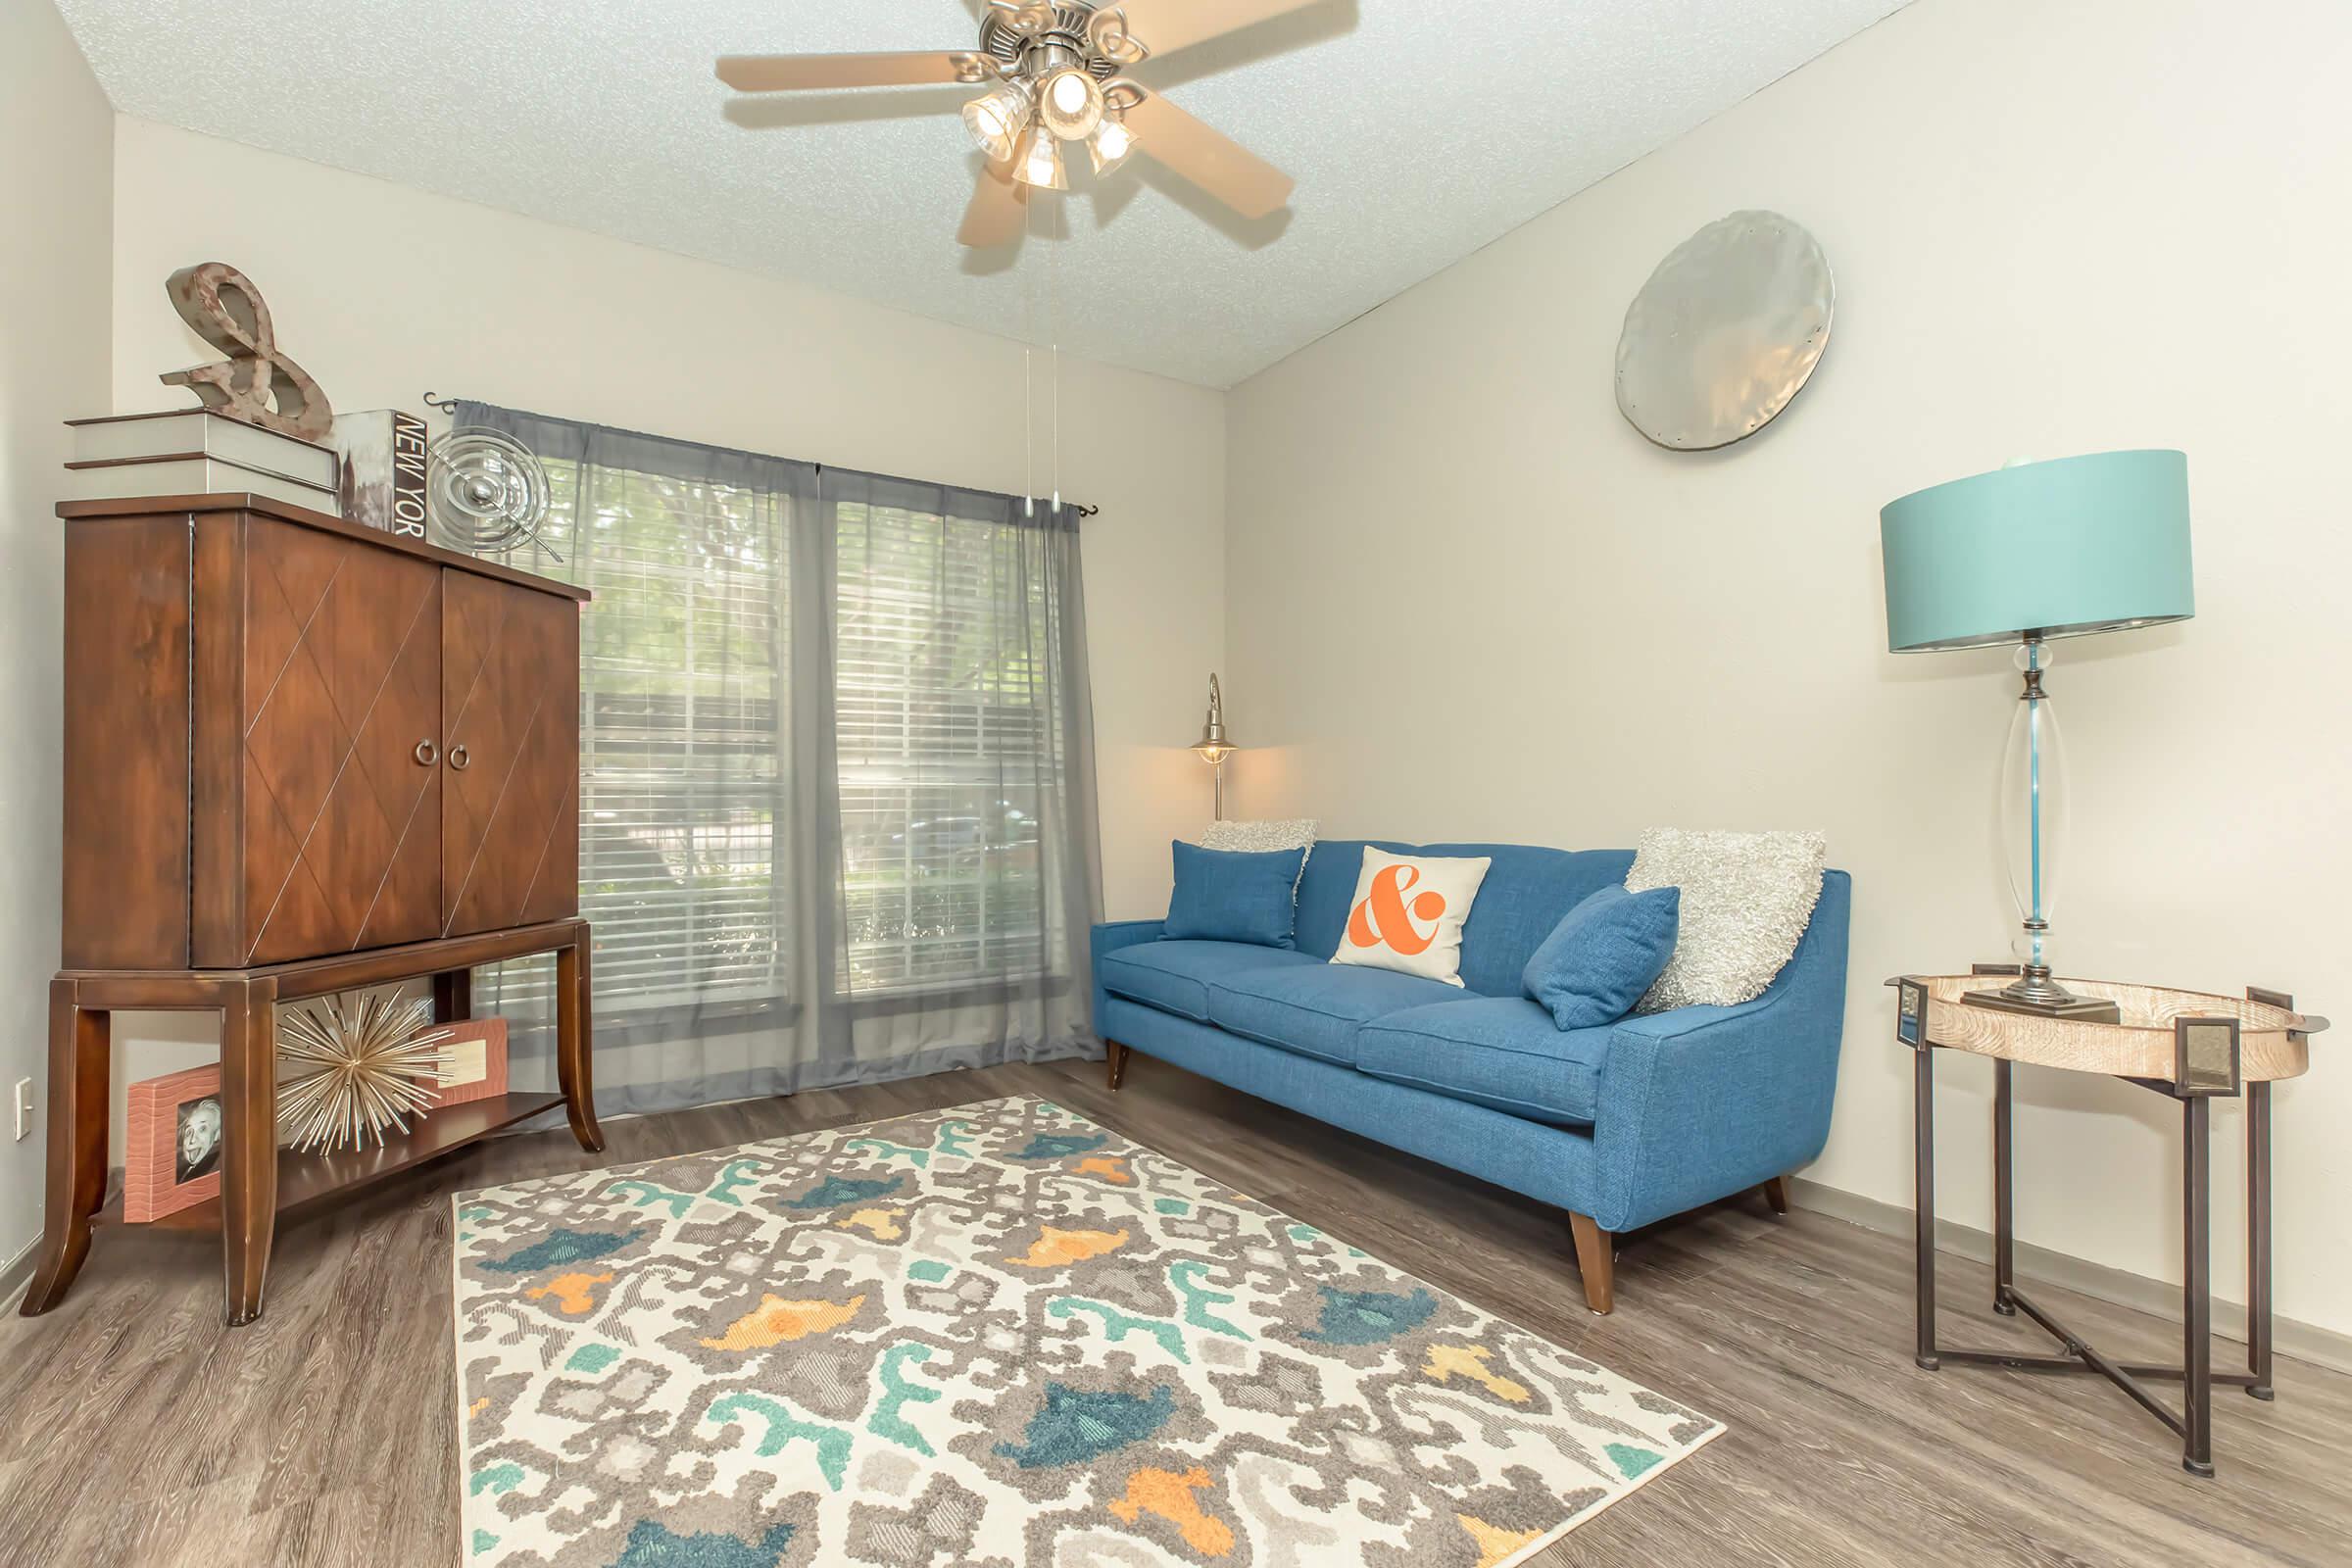 CHARMING APARTMENT HOMES FOR RENT IN DALLAS, TX